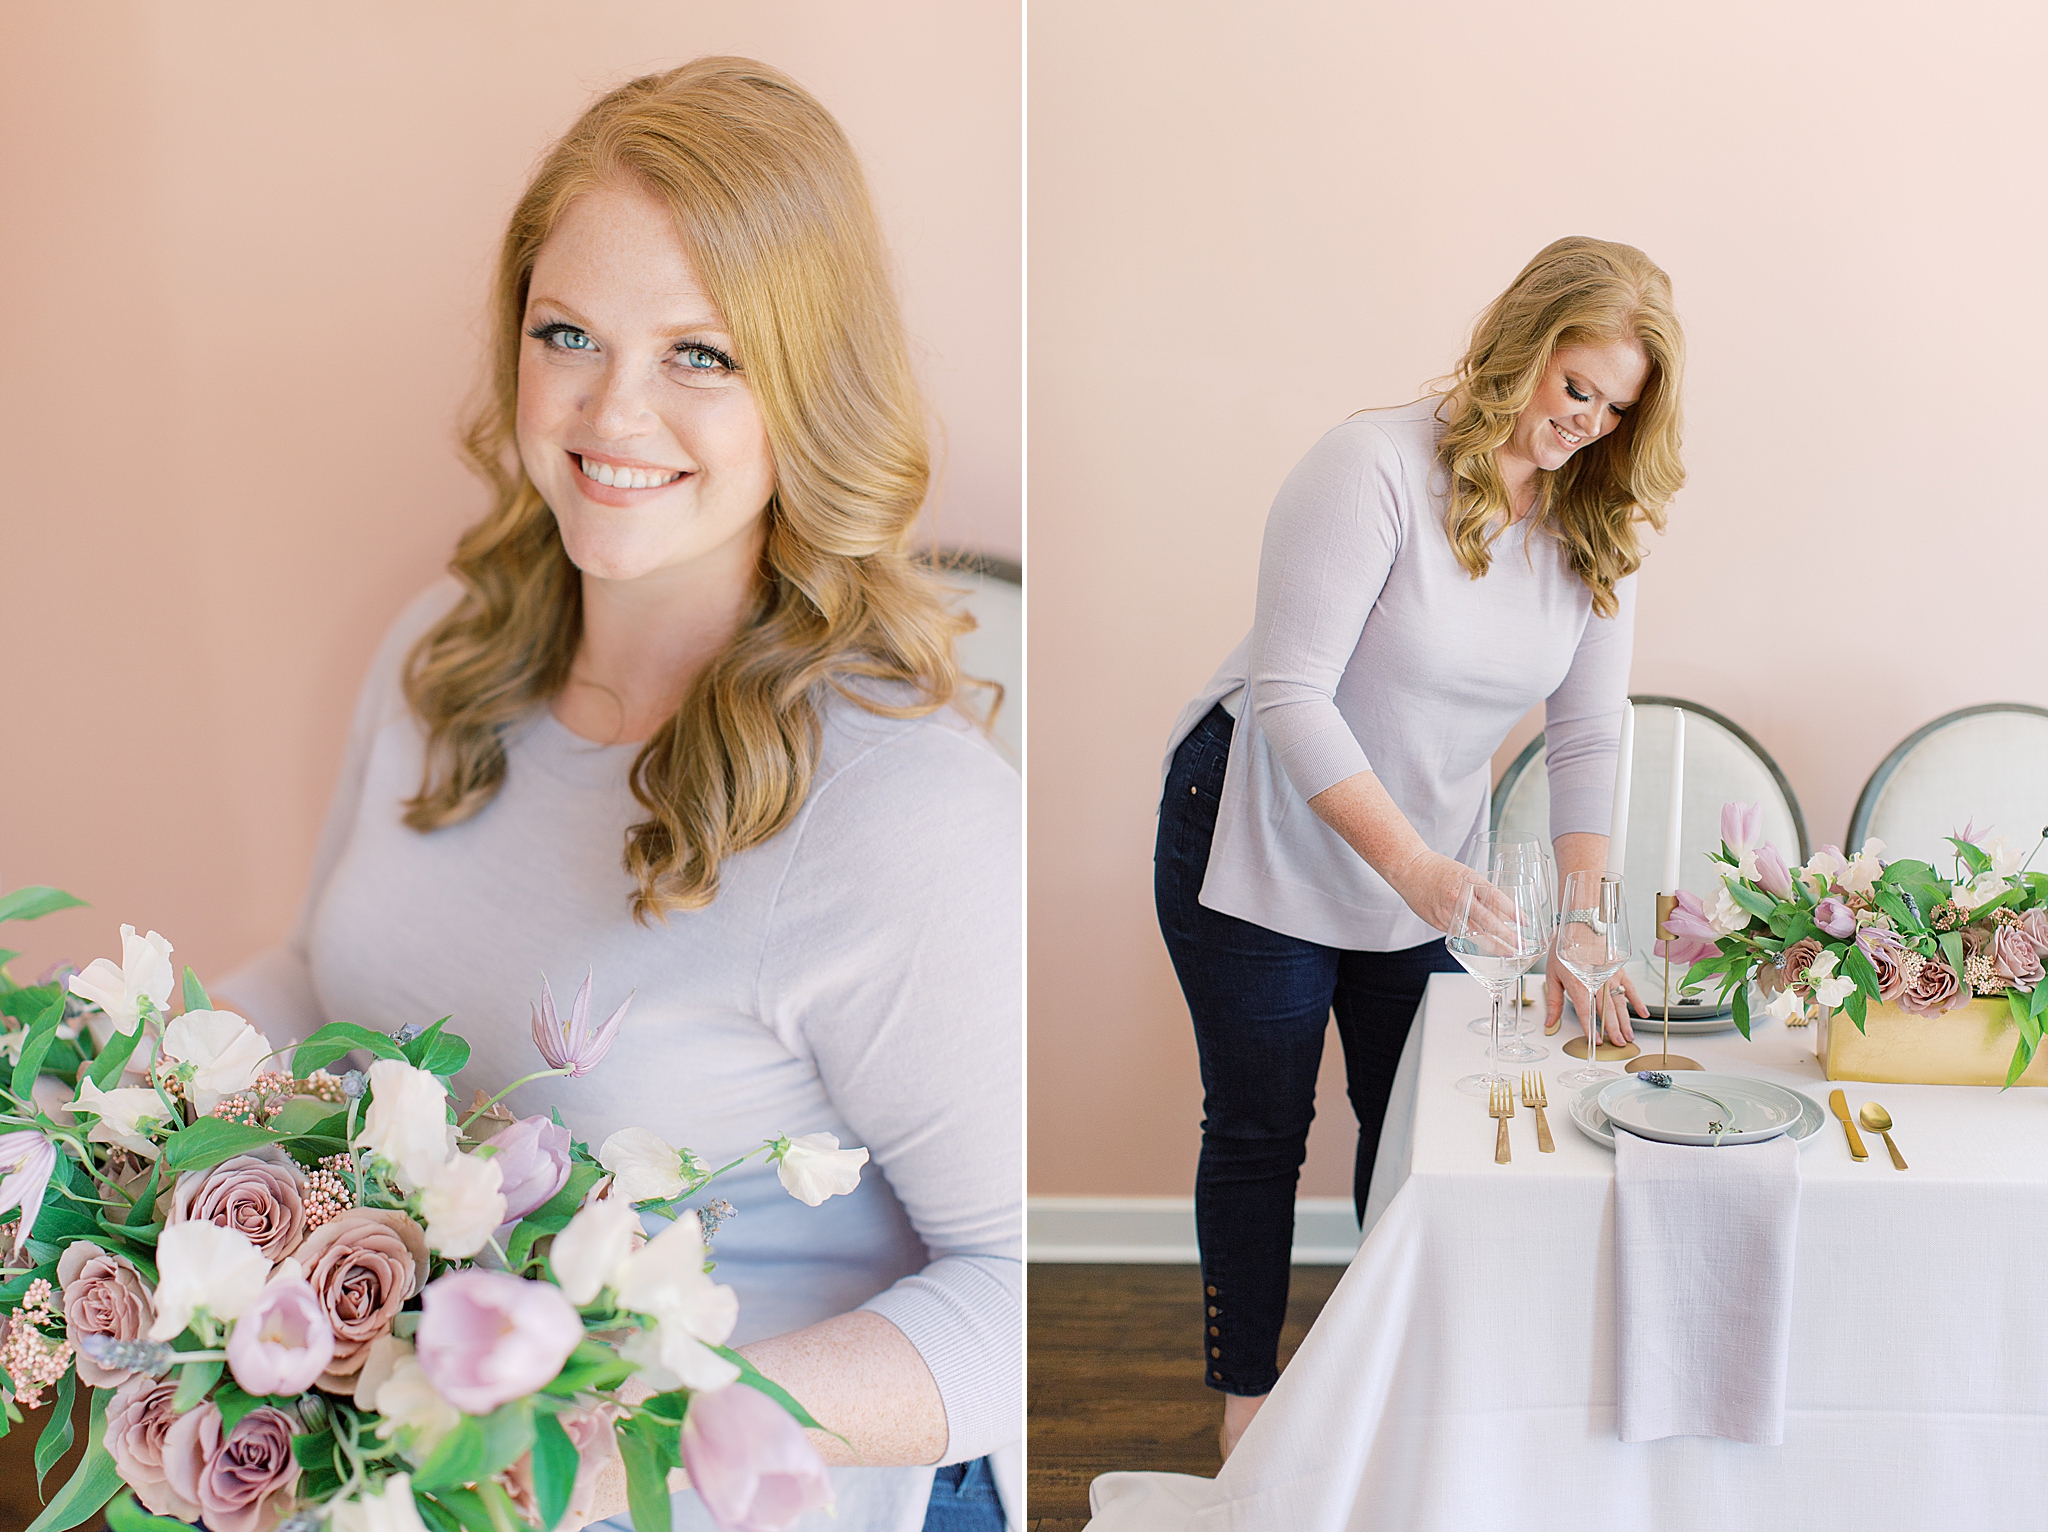 event designer sets table during branding photos with Charlotte branding photographer Demi Mabry